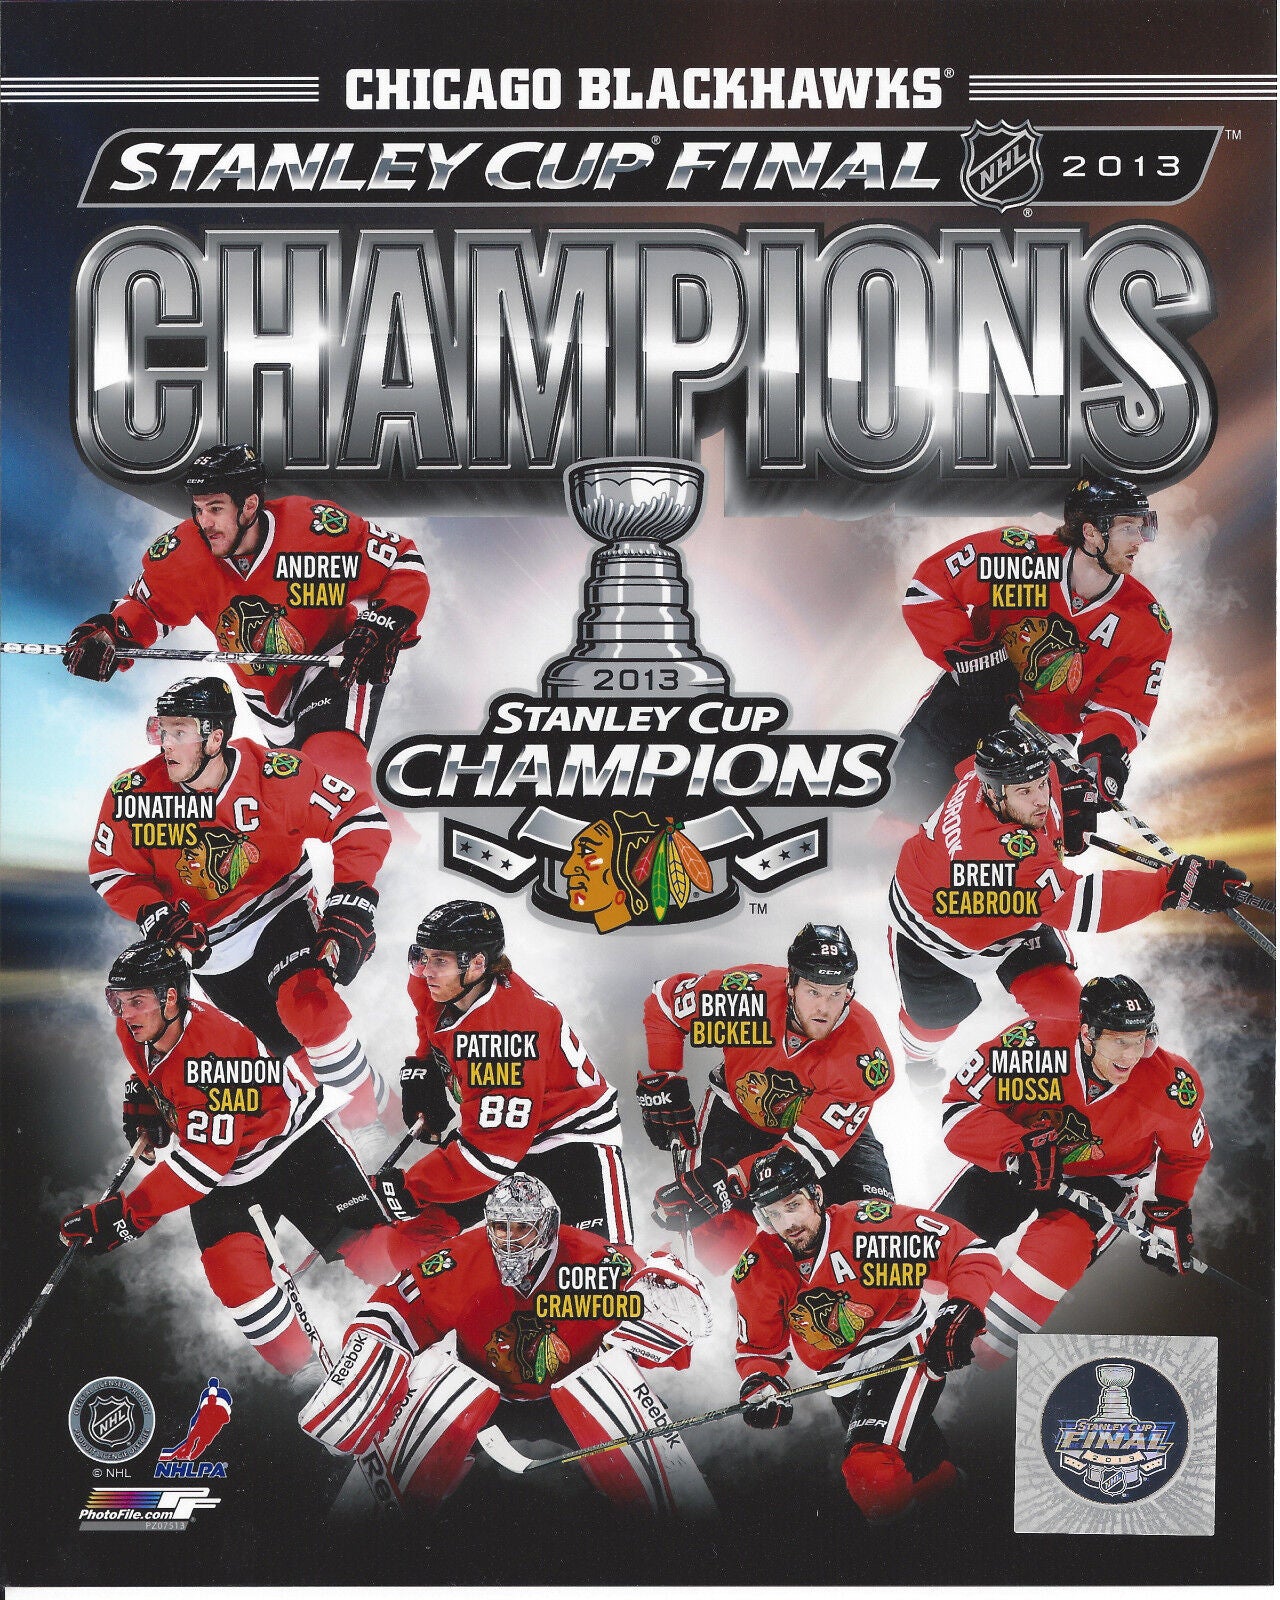 Chicago Blackhawks 2015 Stanley Cup Champions Team Collage Photo (8X10)